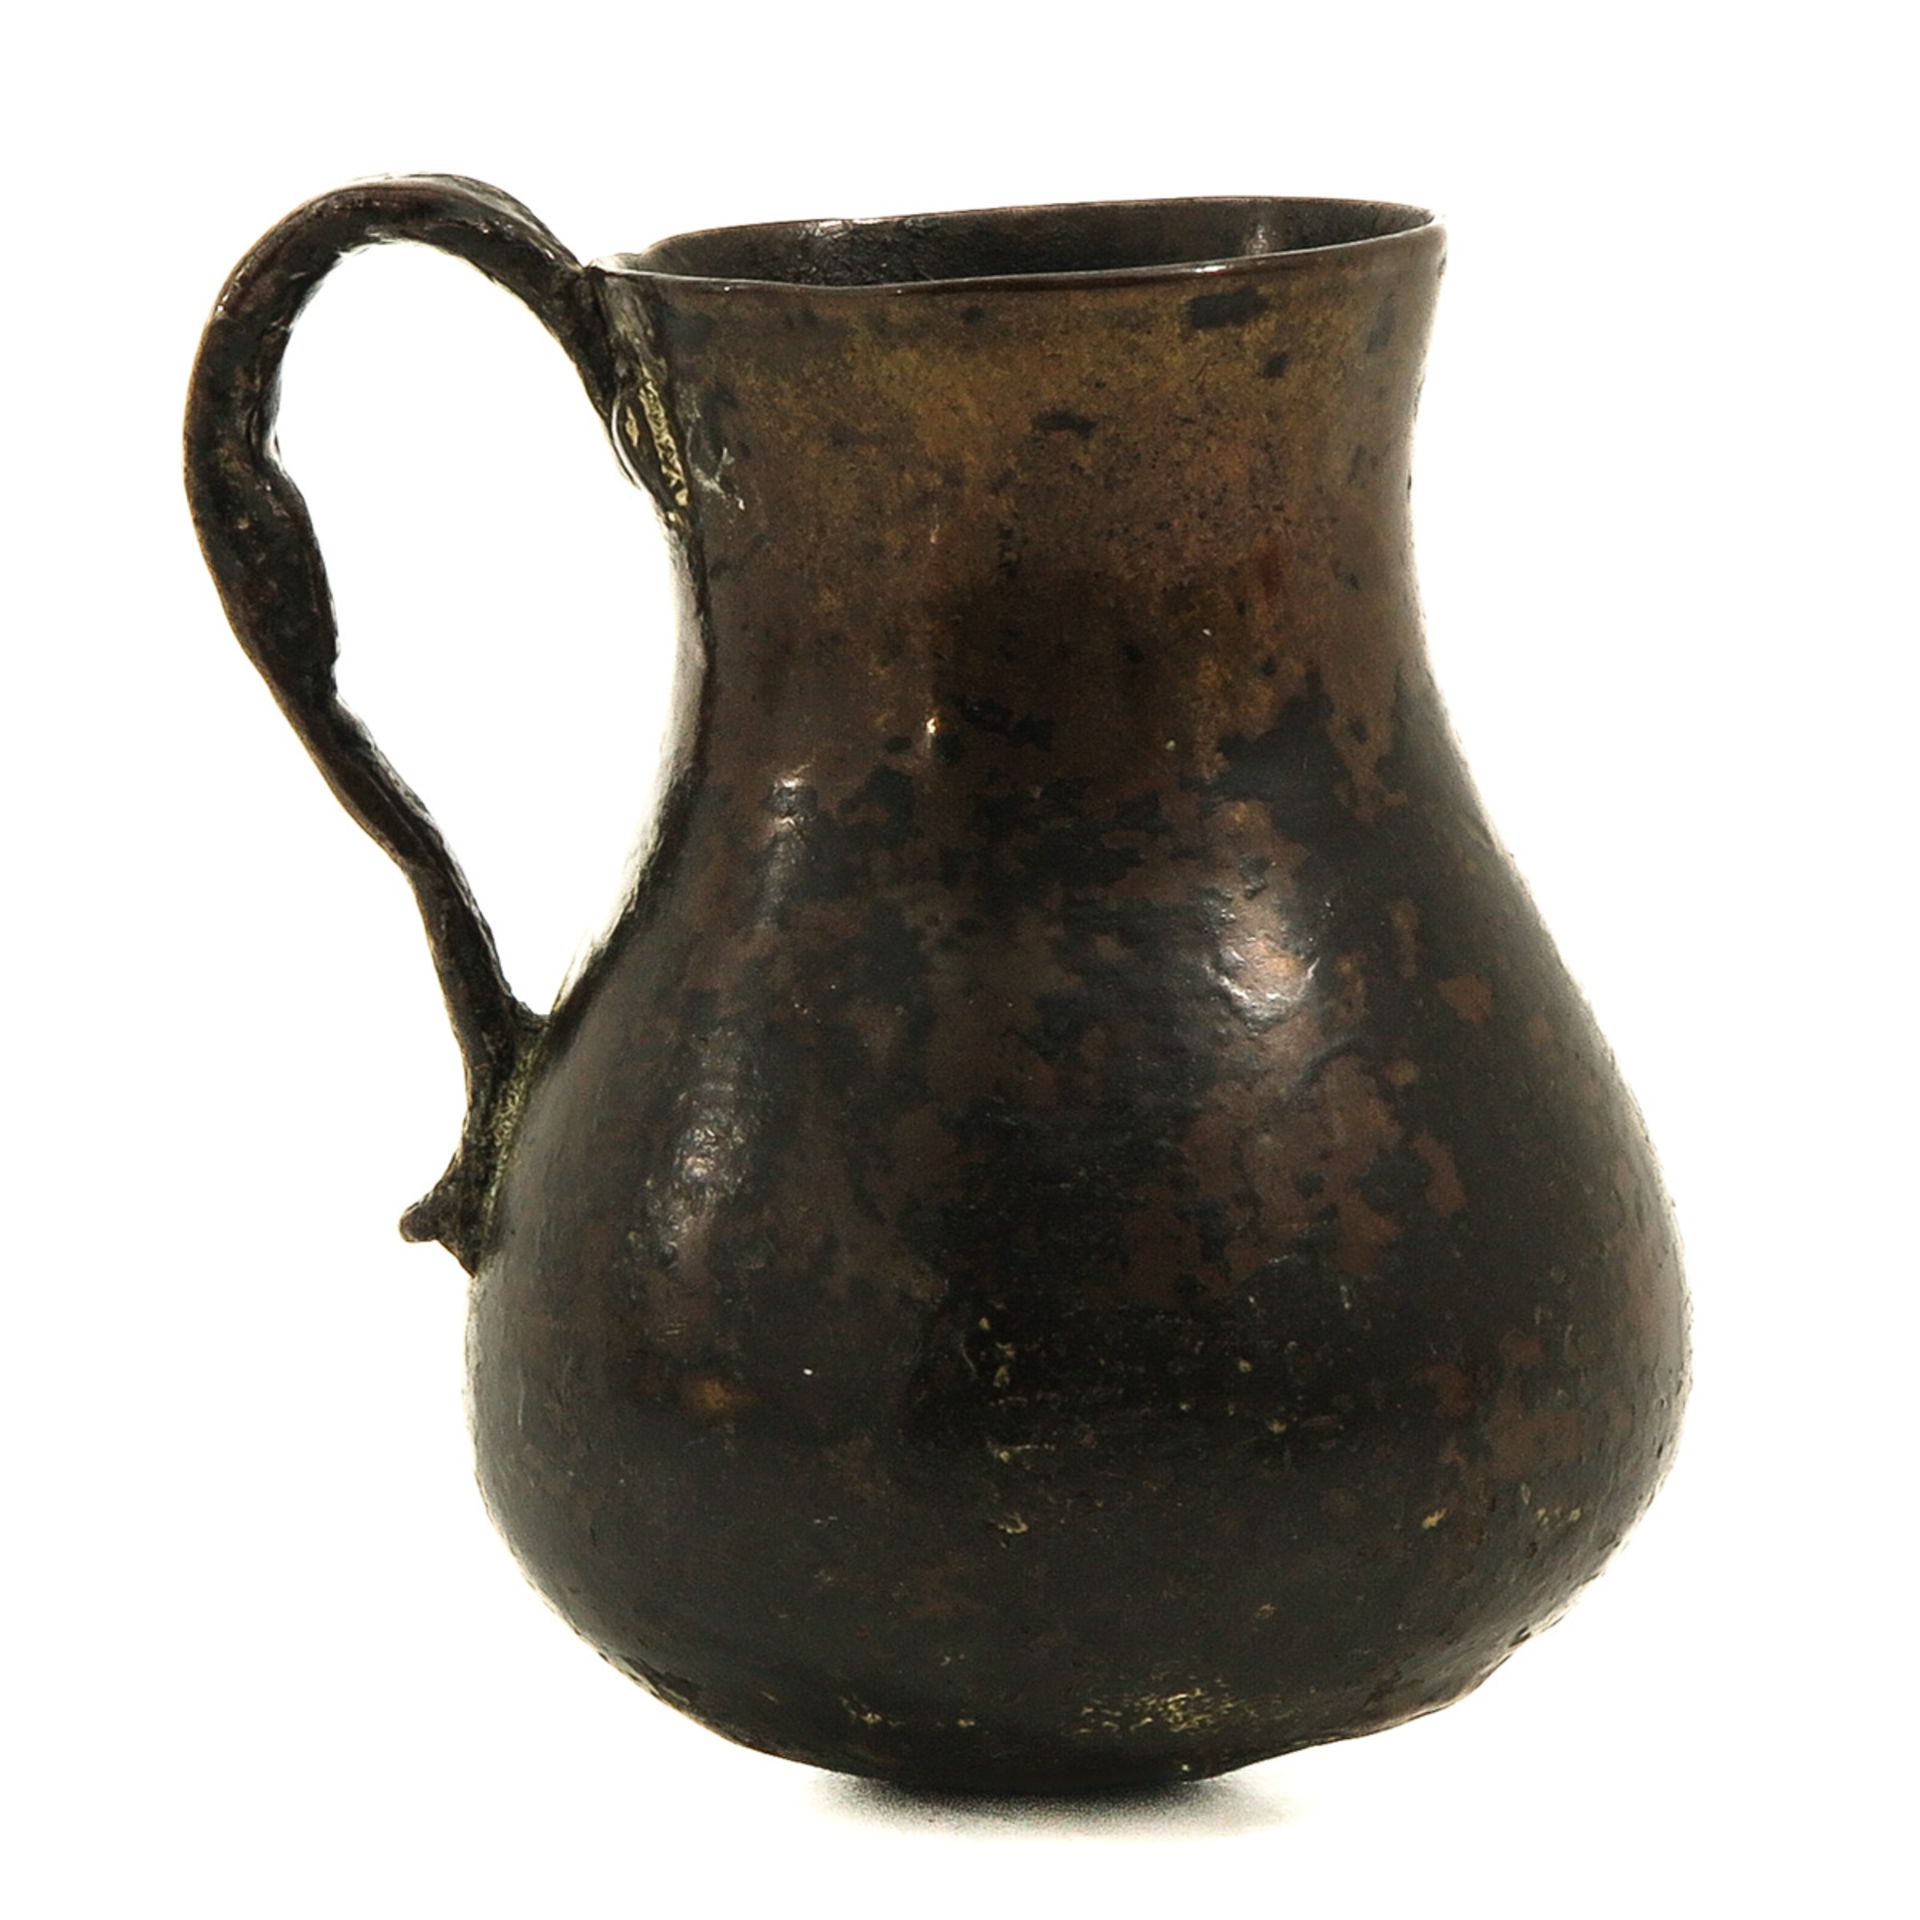 A 14th Century Bronze Measuring Cup - Image 4 of 9